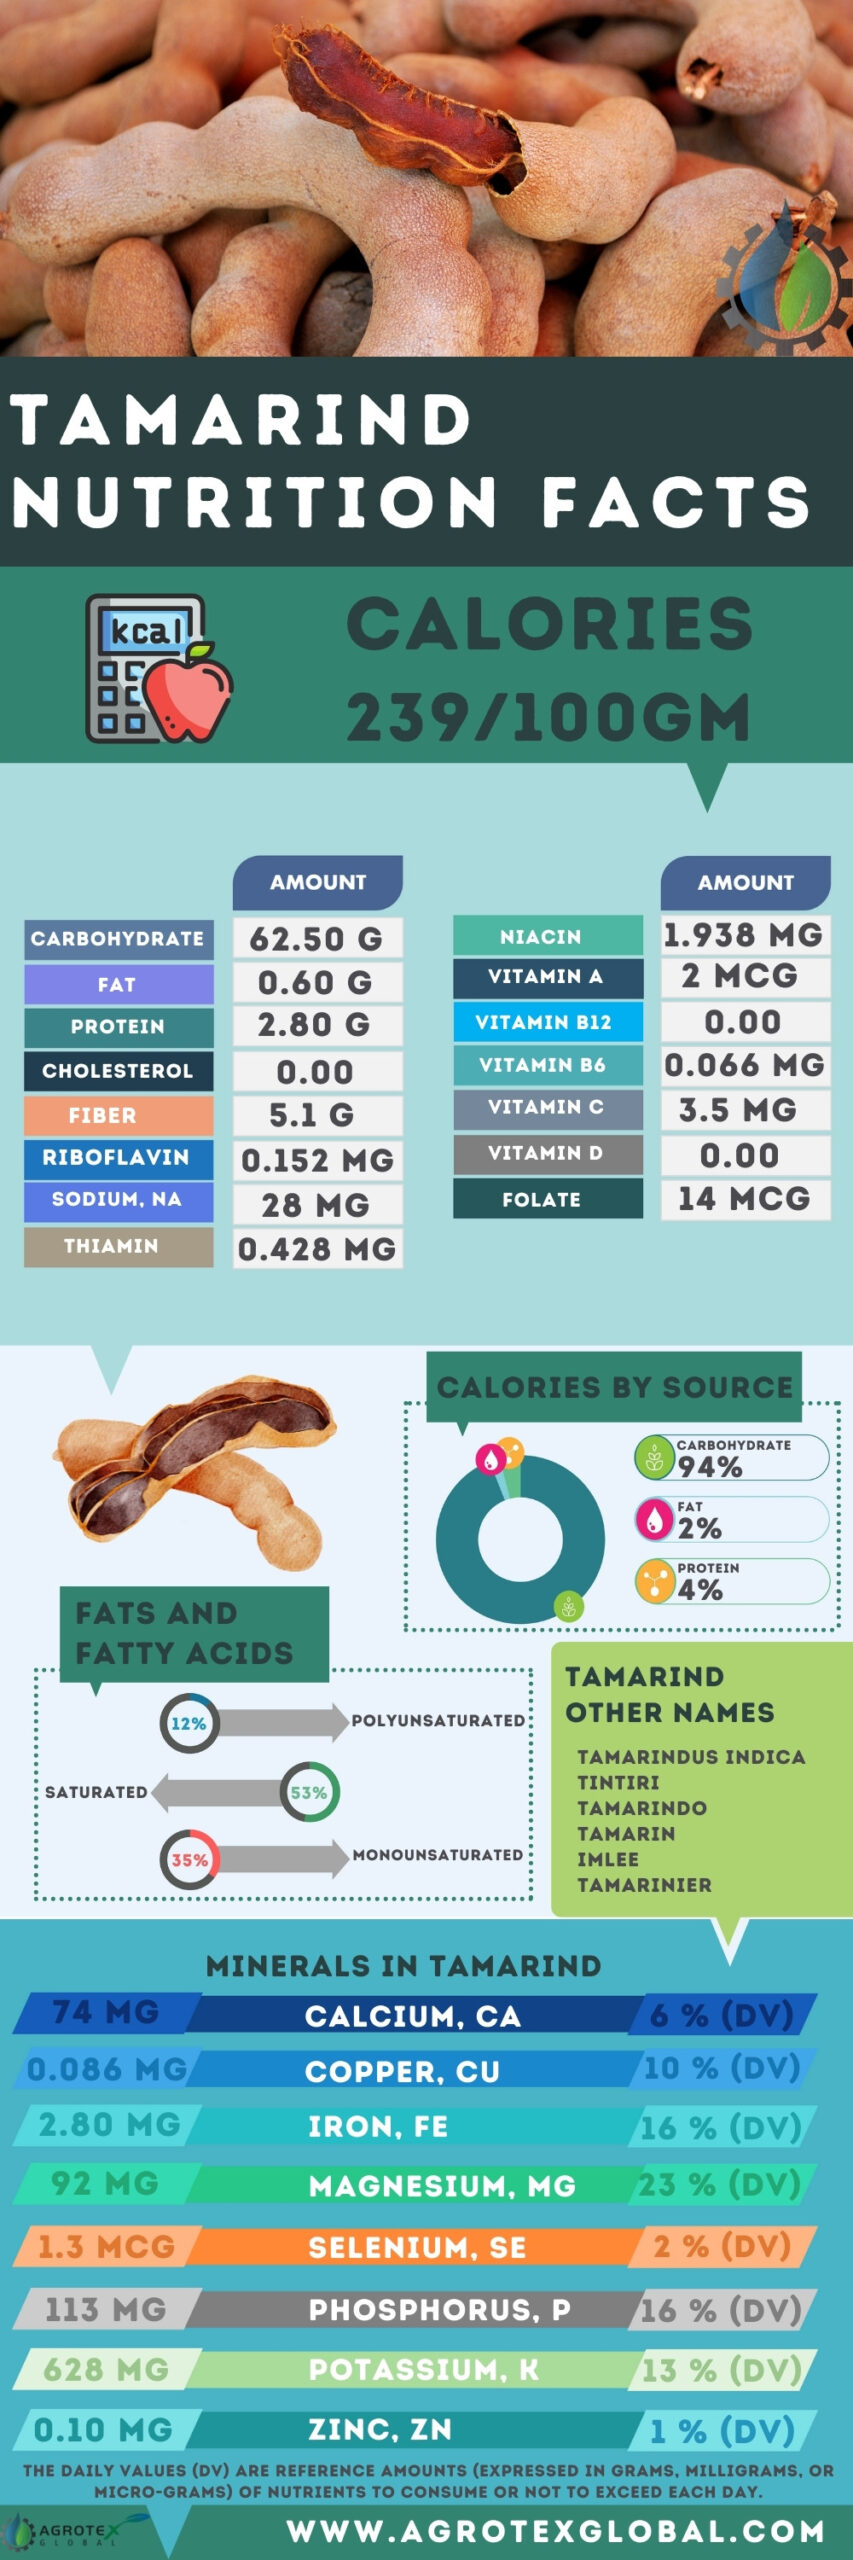 Tamarind Sugar Apple NUTRITION FACTS calorie chart infographic